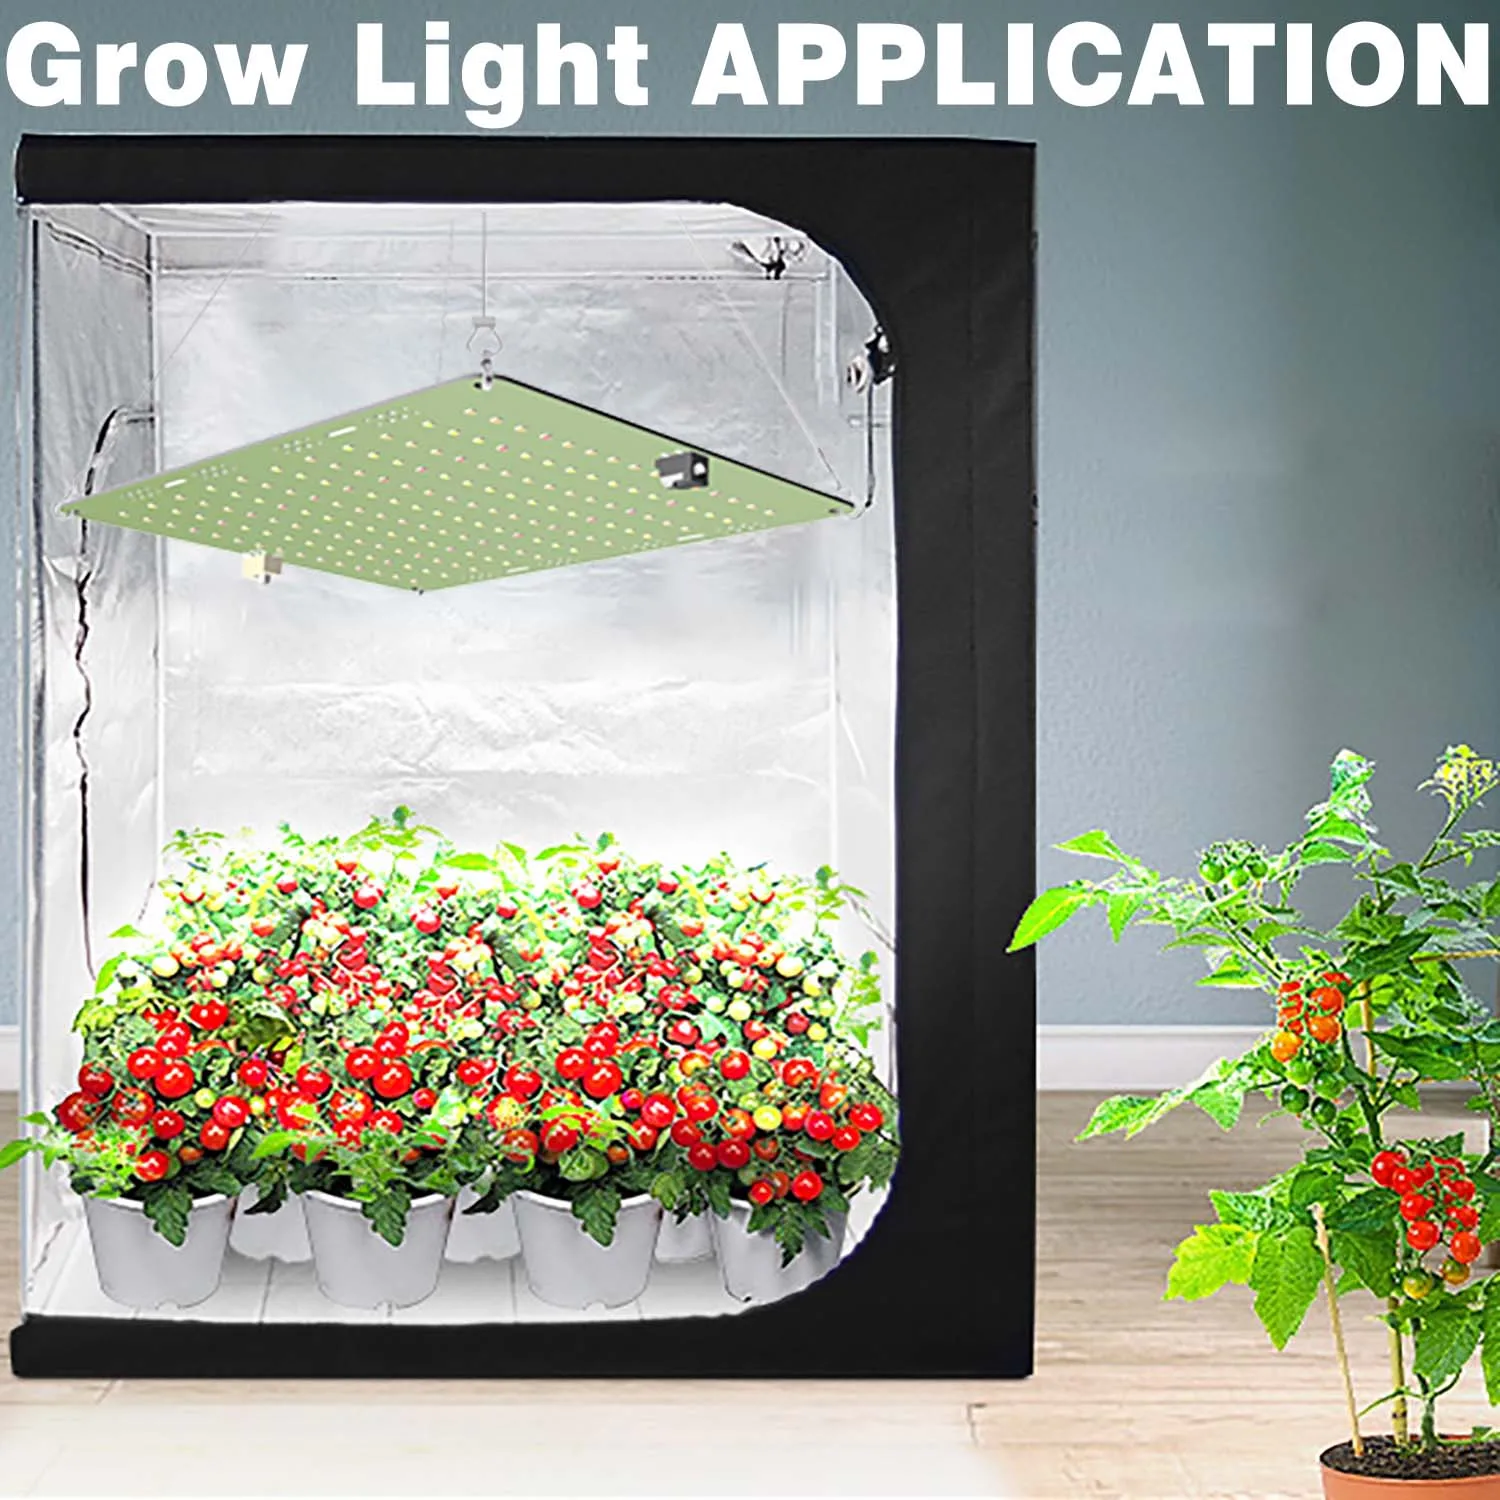 

Full Spectrum with UV and IR Dimmable LED Grow Light High PPFD Phyto Lamp for Indoor Greenhouse Plants Flower Seed Veg Blooming